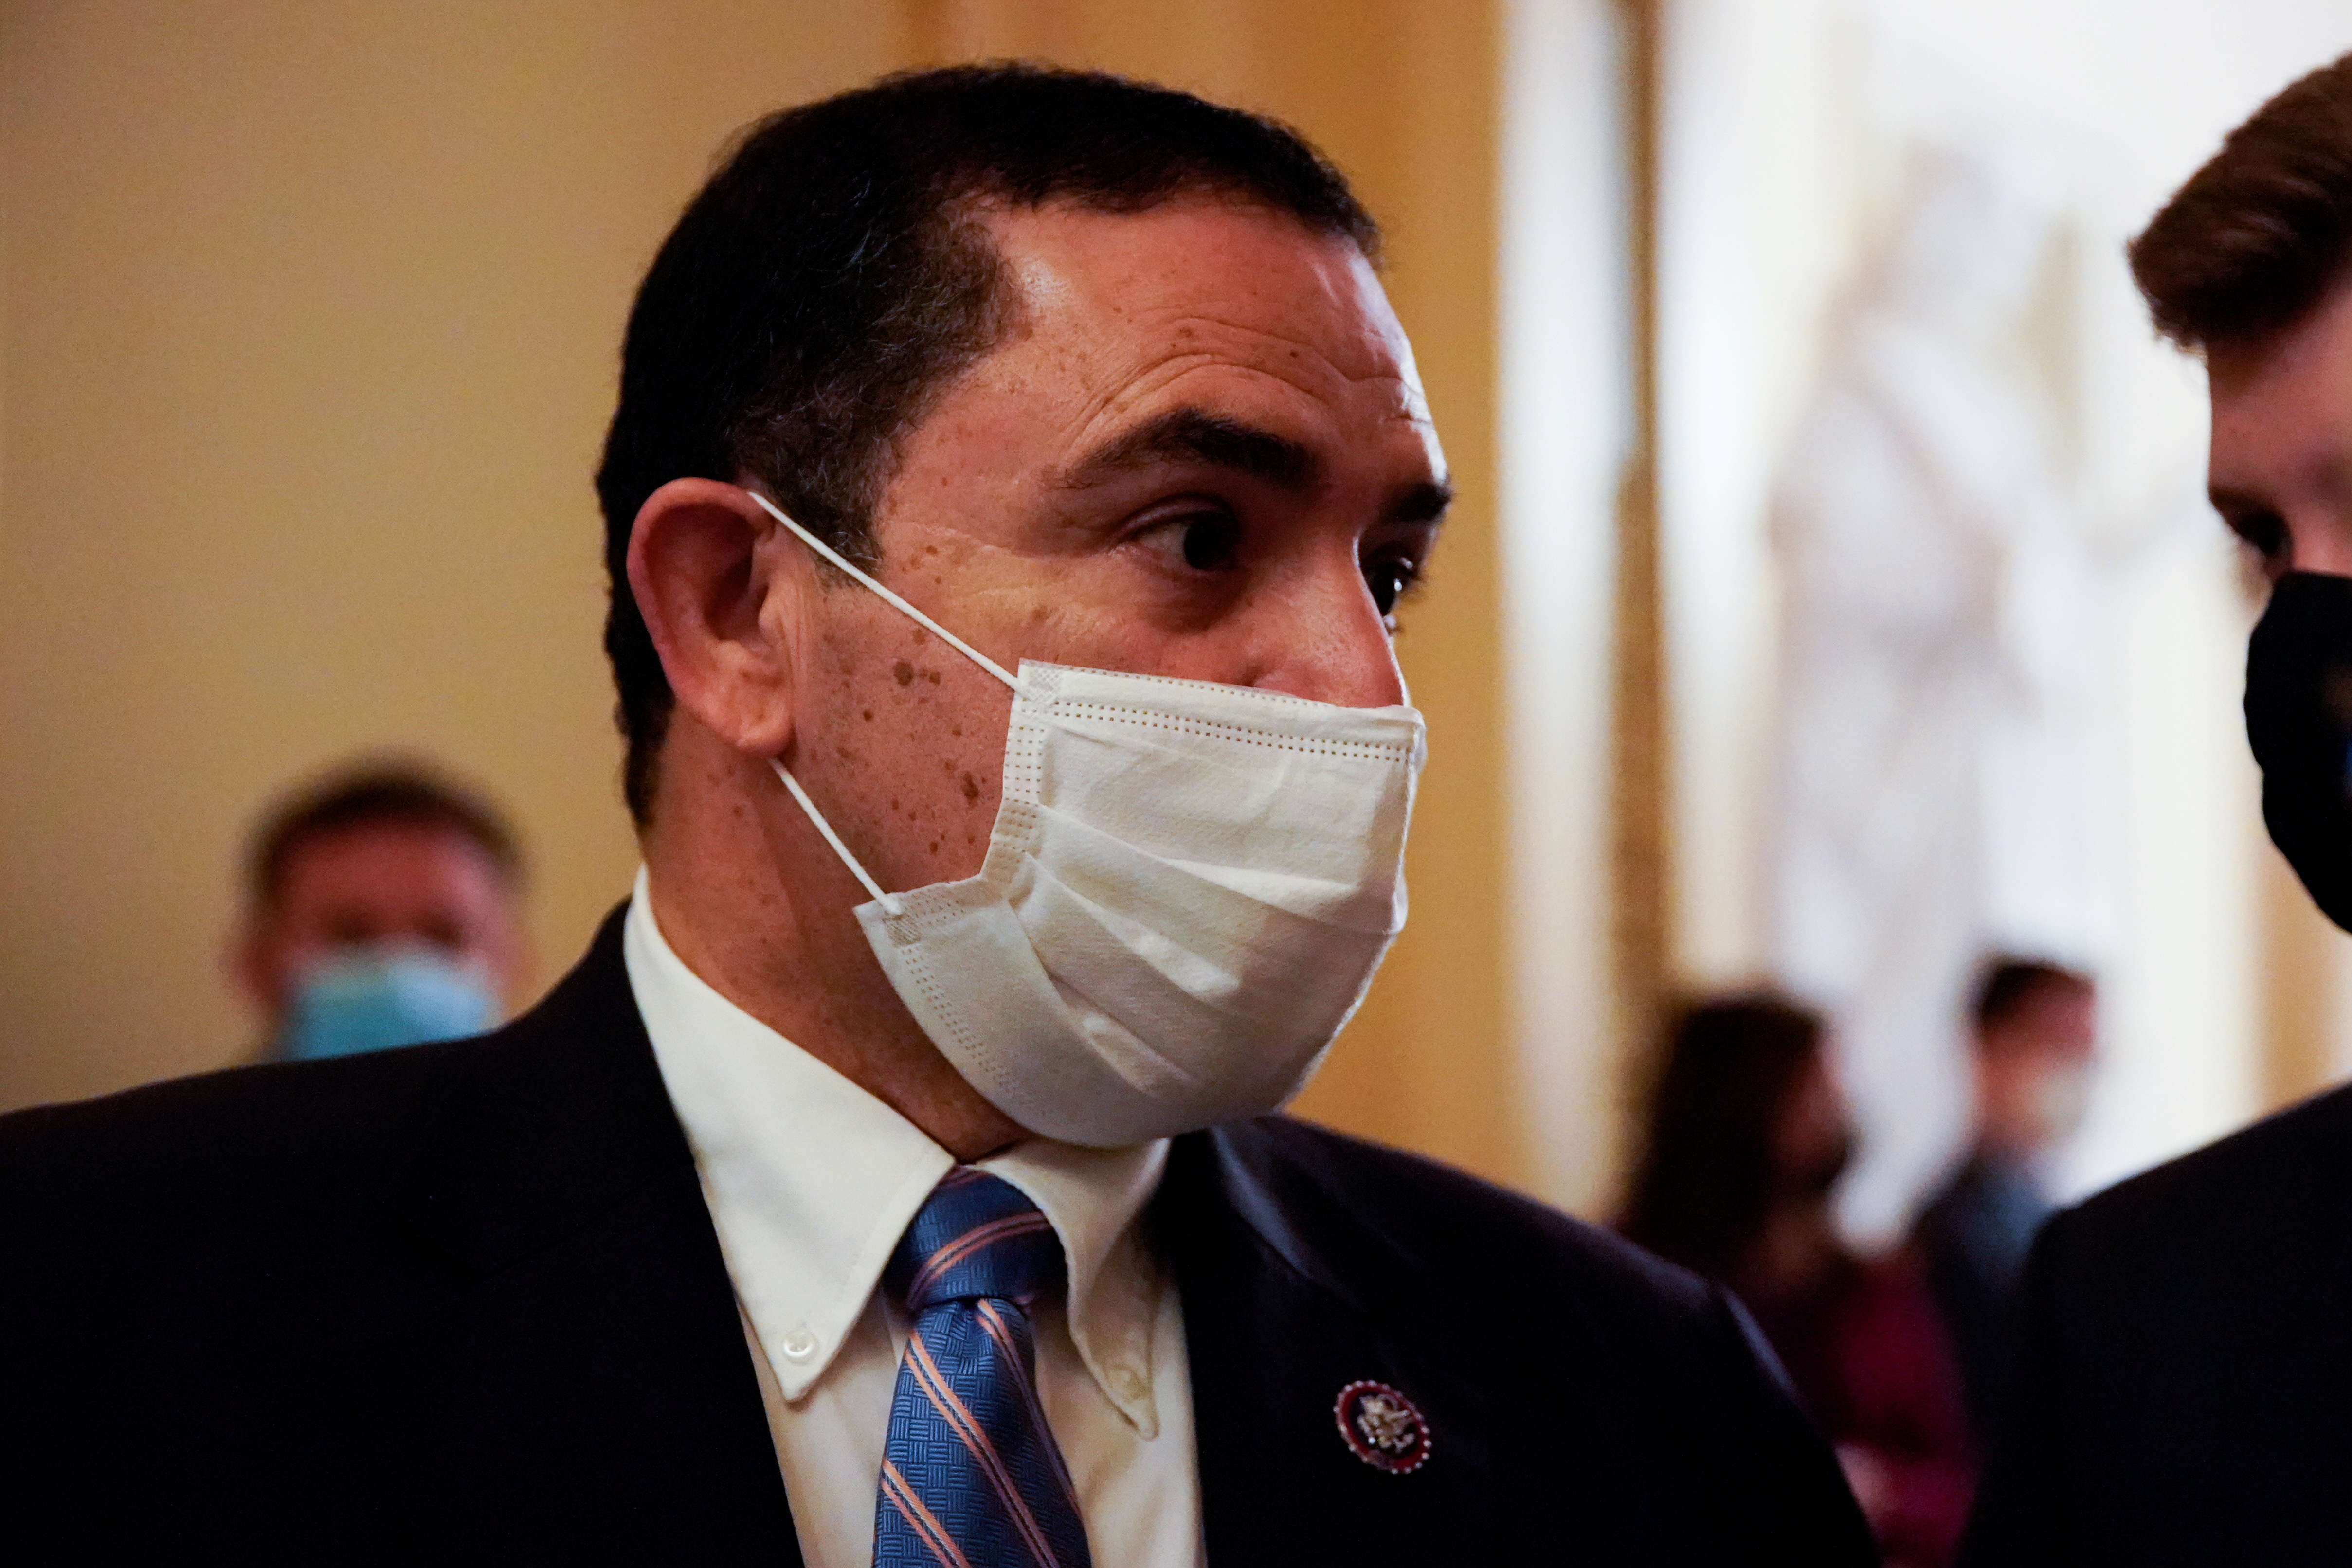 U.S. Representative Cuellar stops to talk to reporters on his way vote on the House floor at the U.S. Capitol in Washington